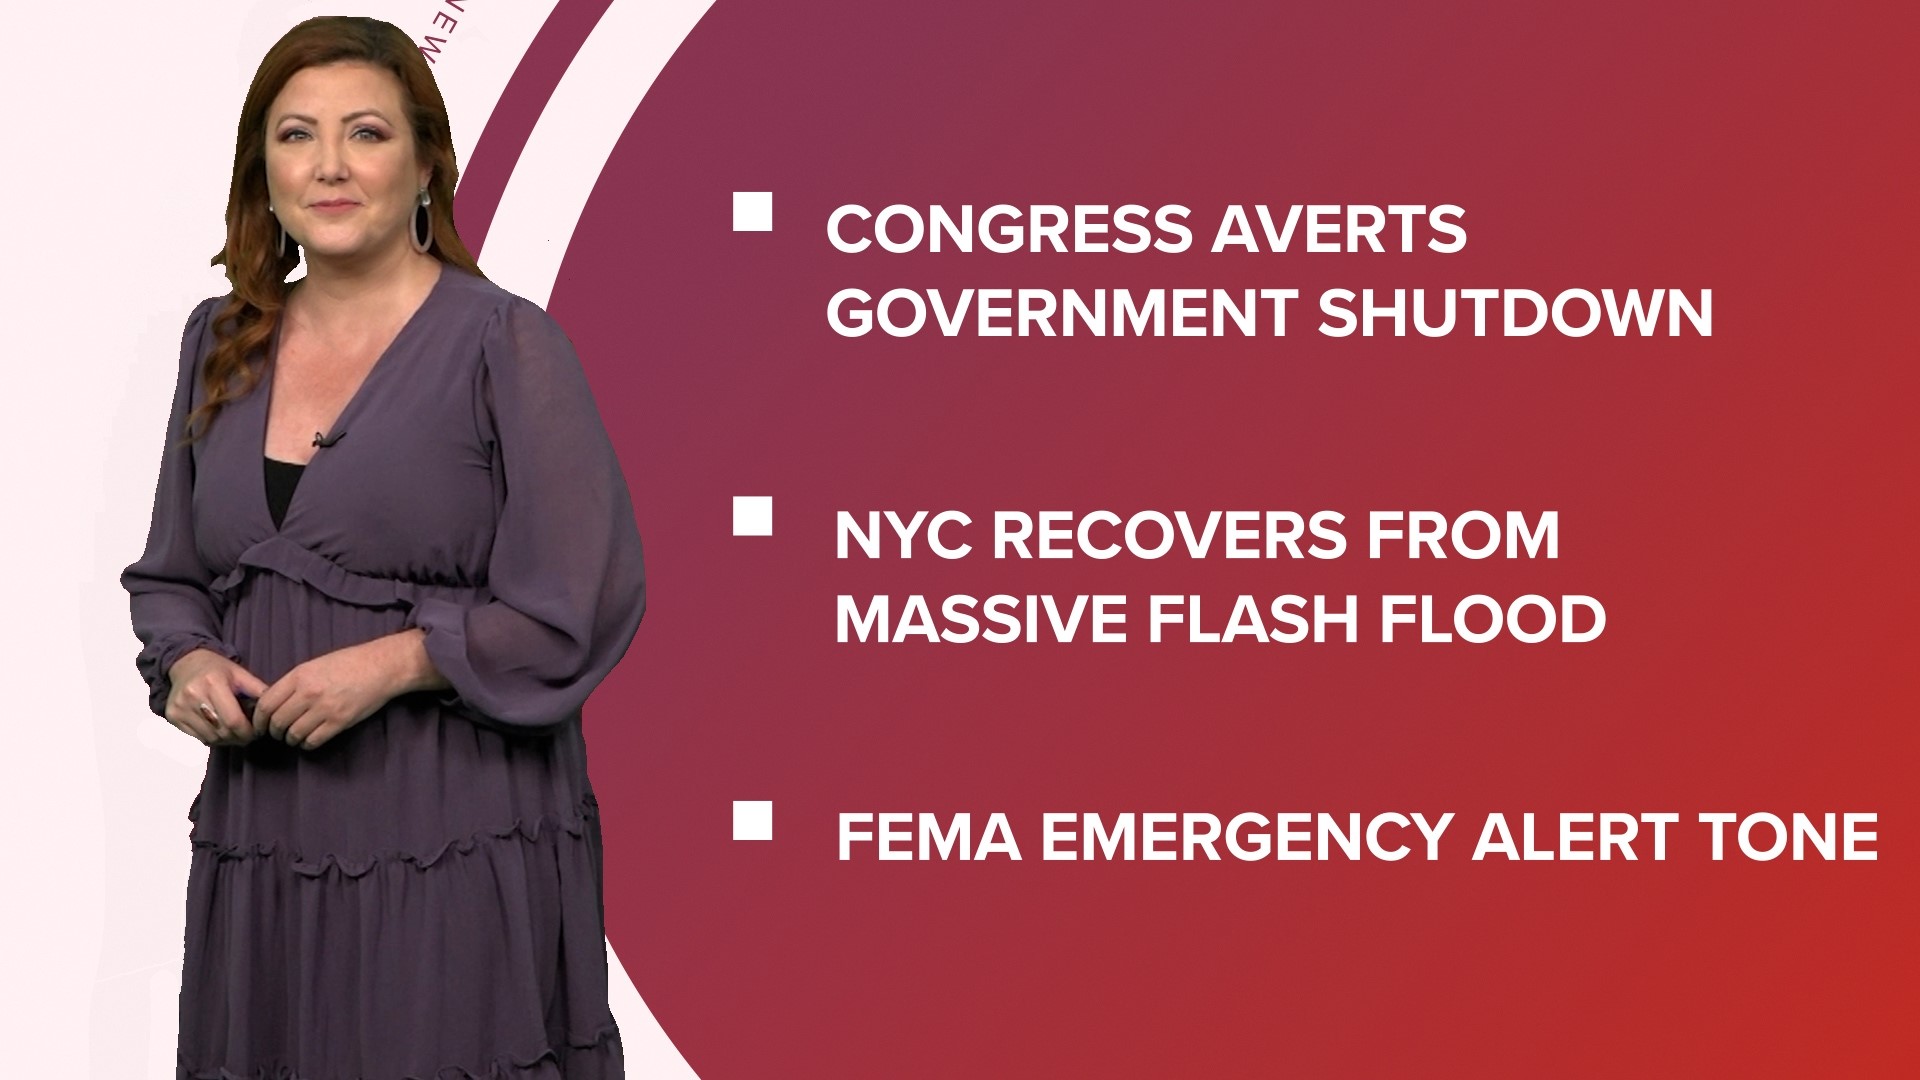 A look at what is happening in the news from a government shutdown avoided for now to dealing with intense flooding in NYC and student loan payments begin again.